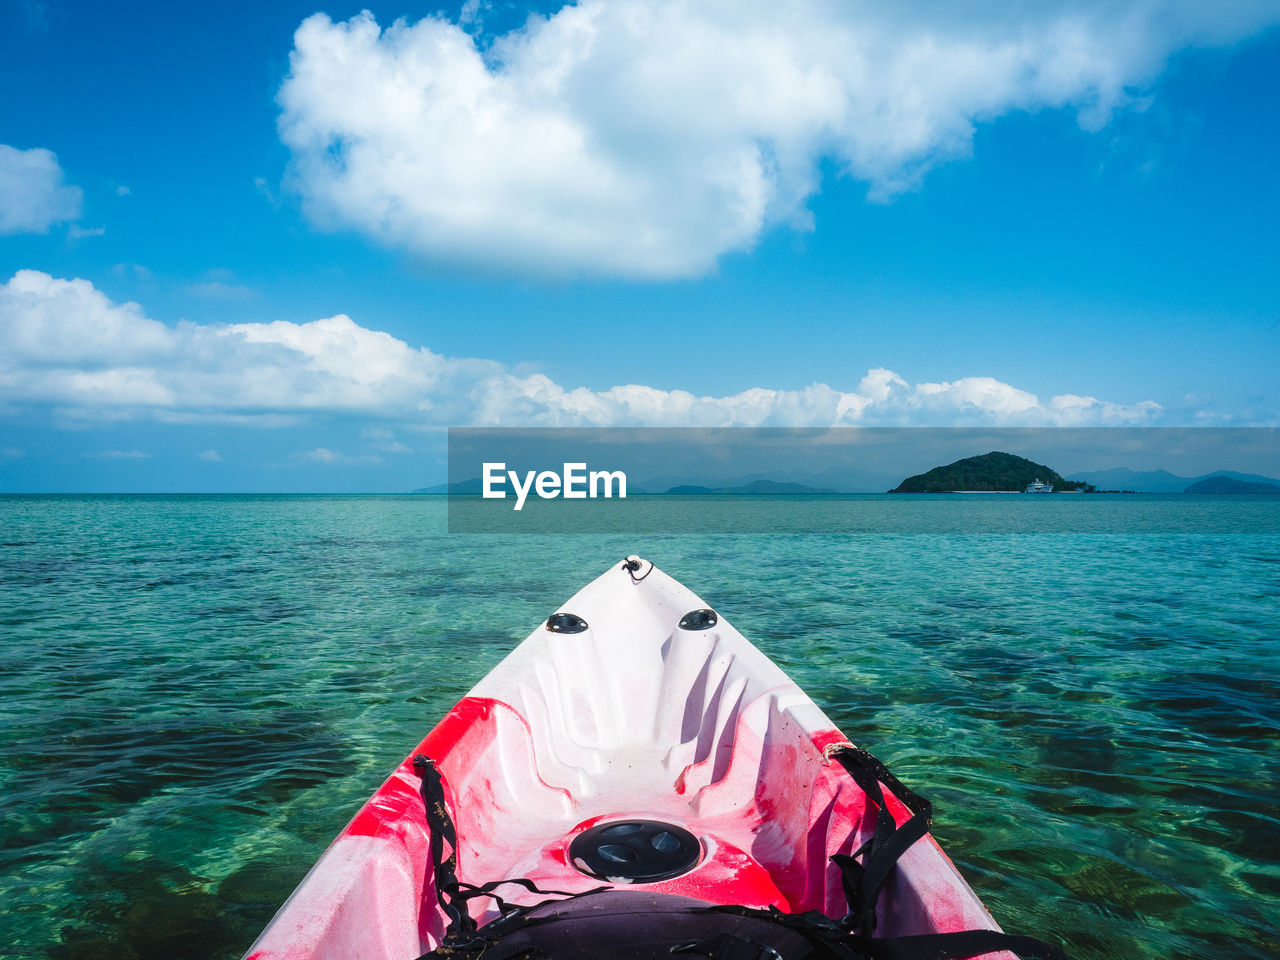 First person view of sea kayak with clear turquoise water and coral reef. koh mak island, thailand.